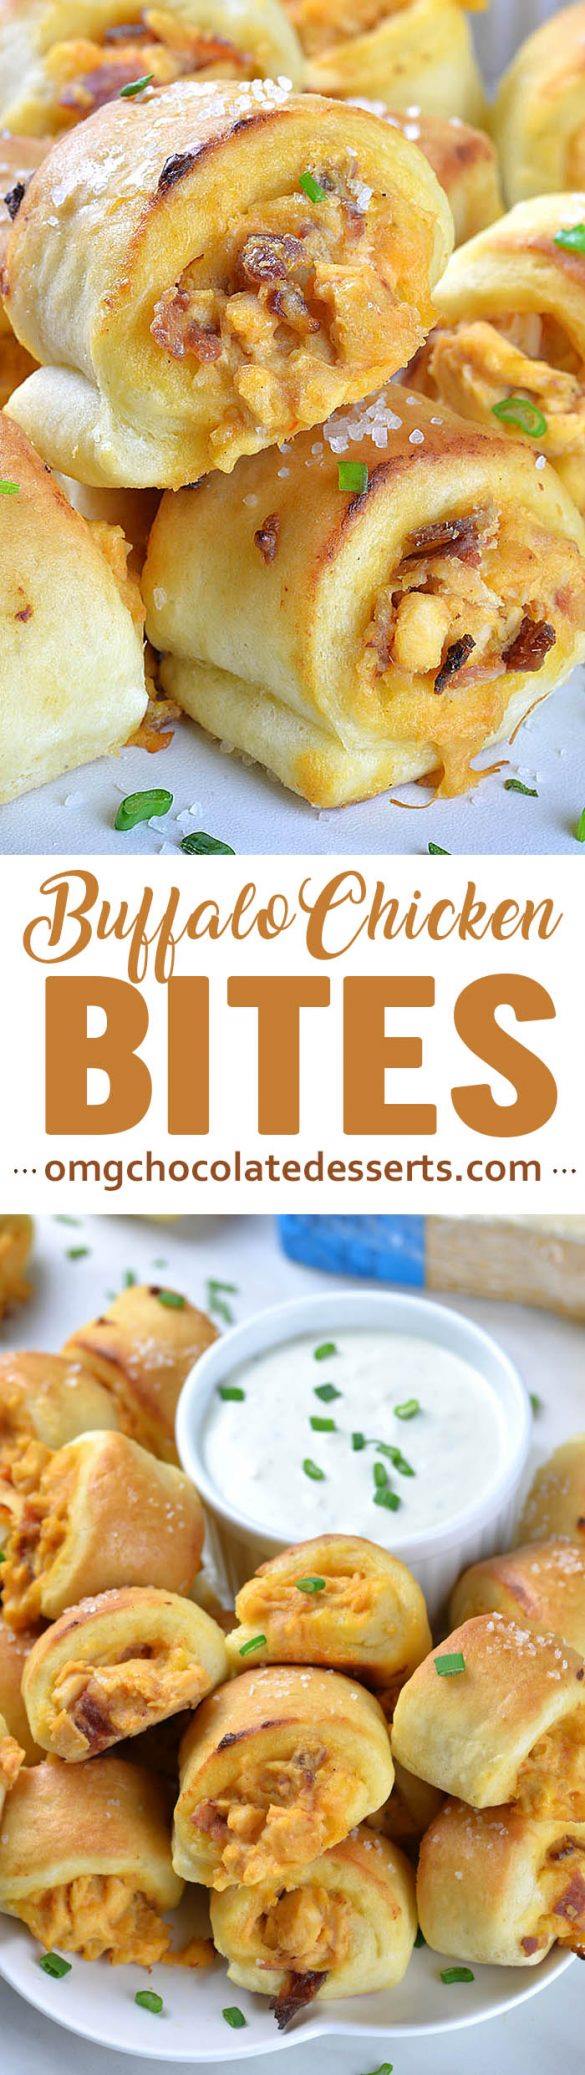 Buffalo Chicken Bites with Blue Cheese Dip | A Bite-Sized Pastry Appetizer